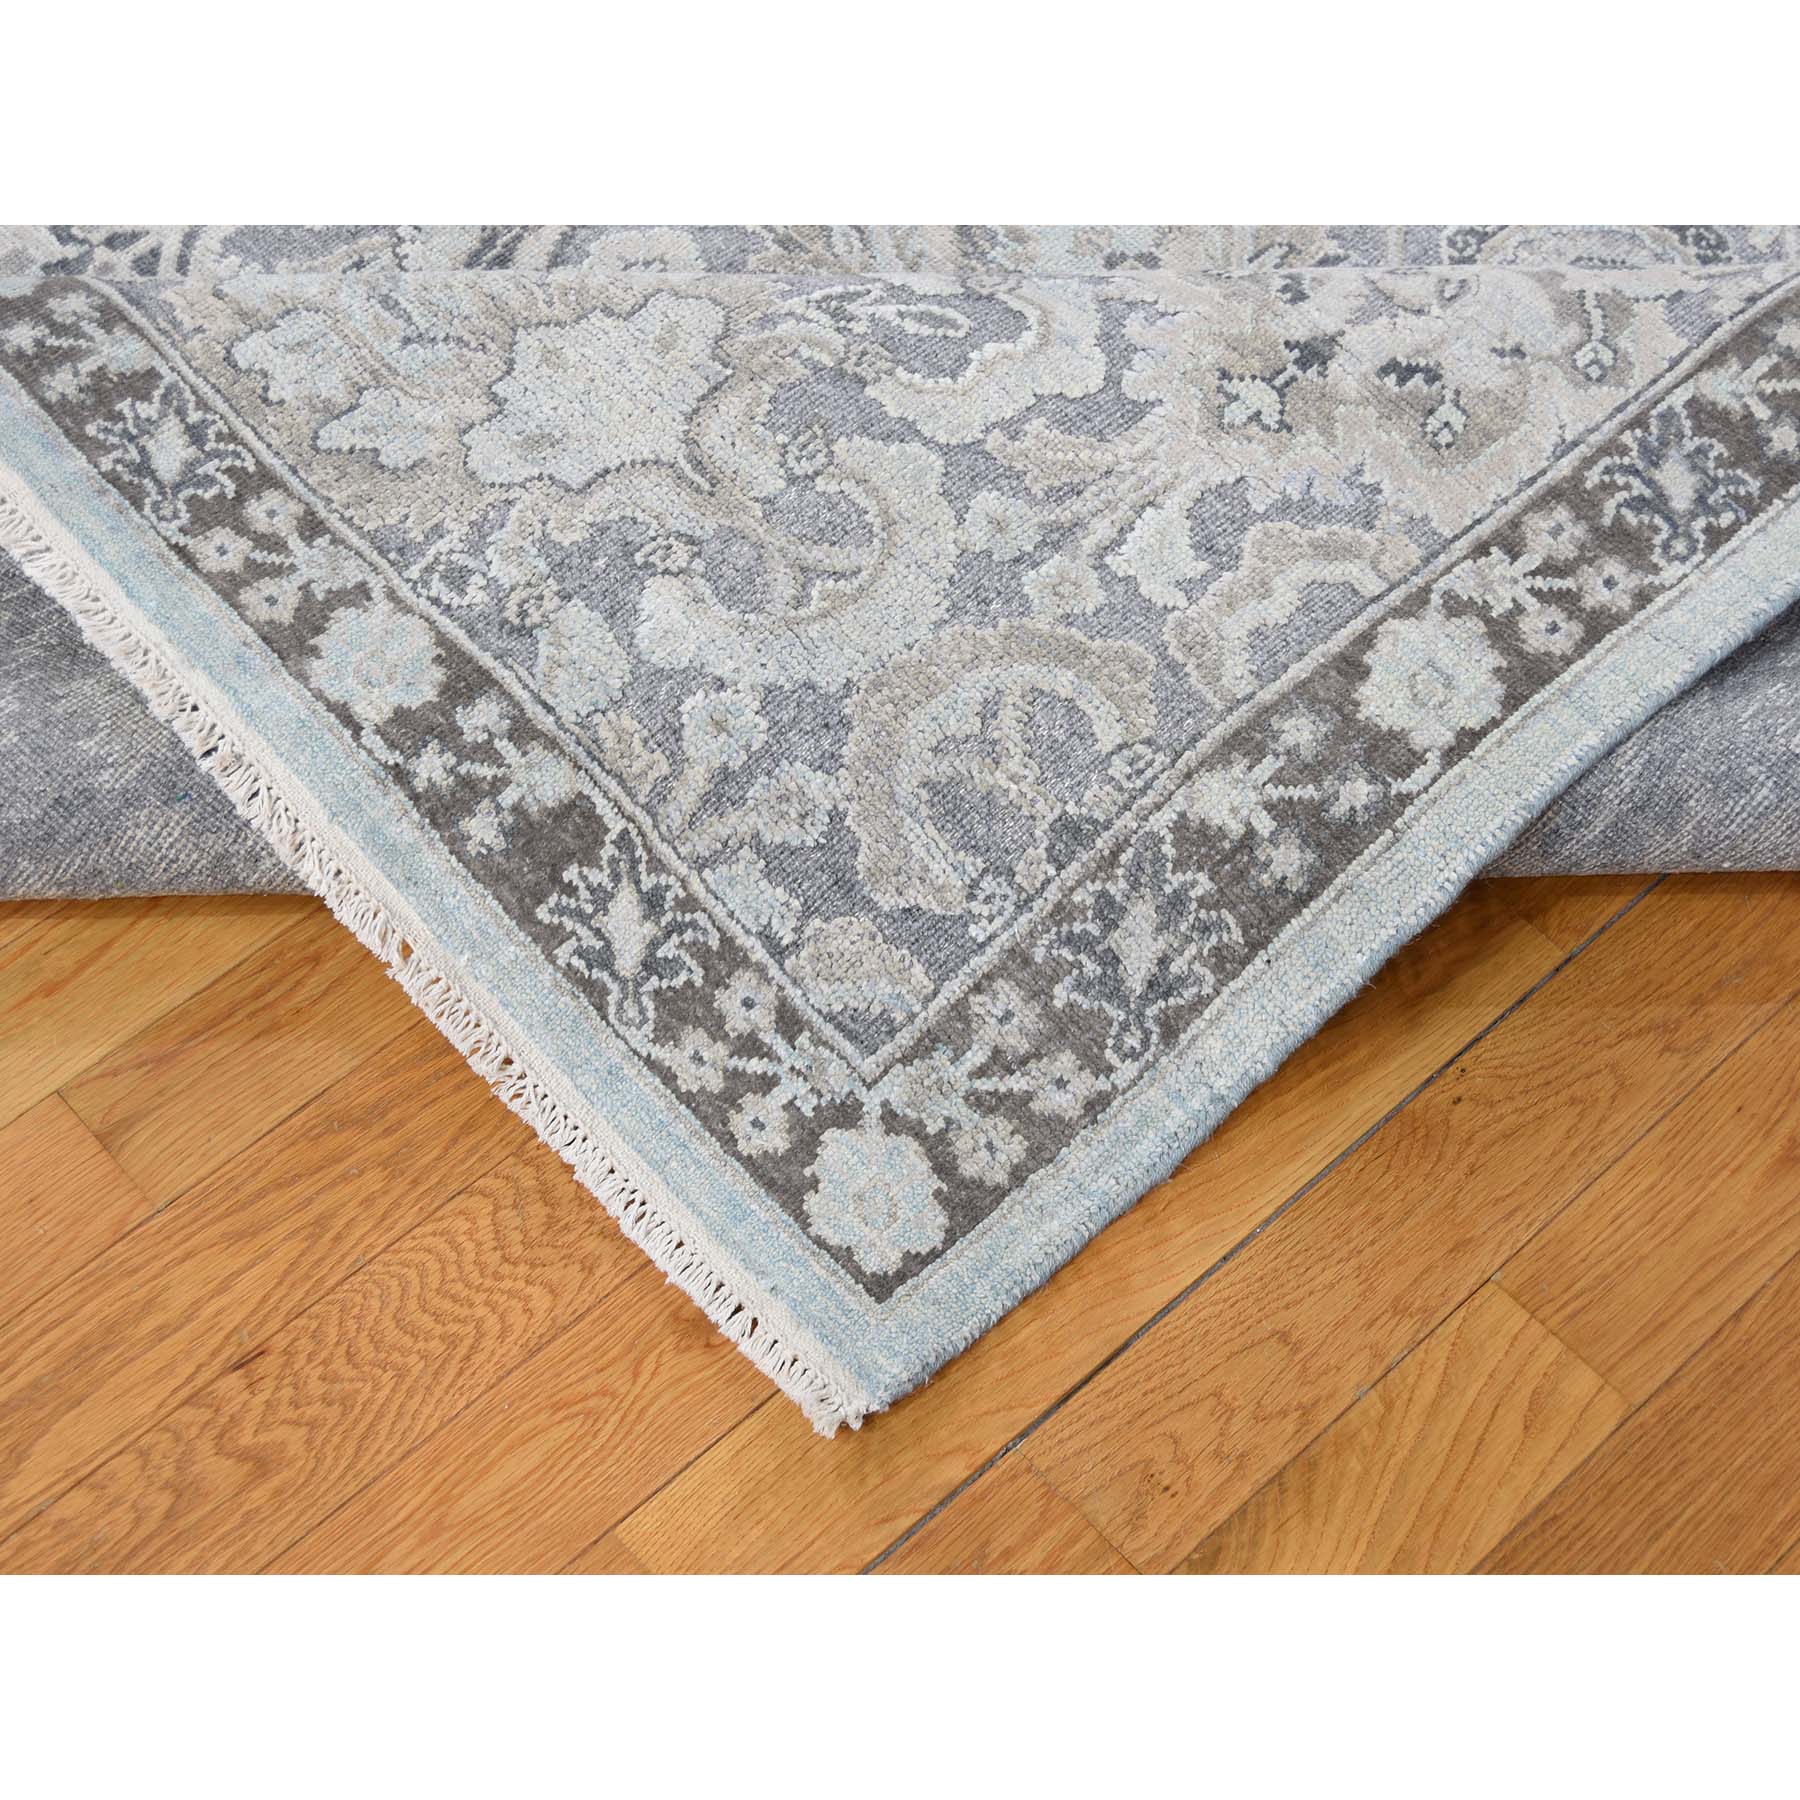 9-1 x12-5  Hand-Knotted Flat Weave with Raised Silk Oriental Rug 